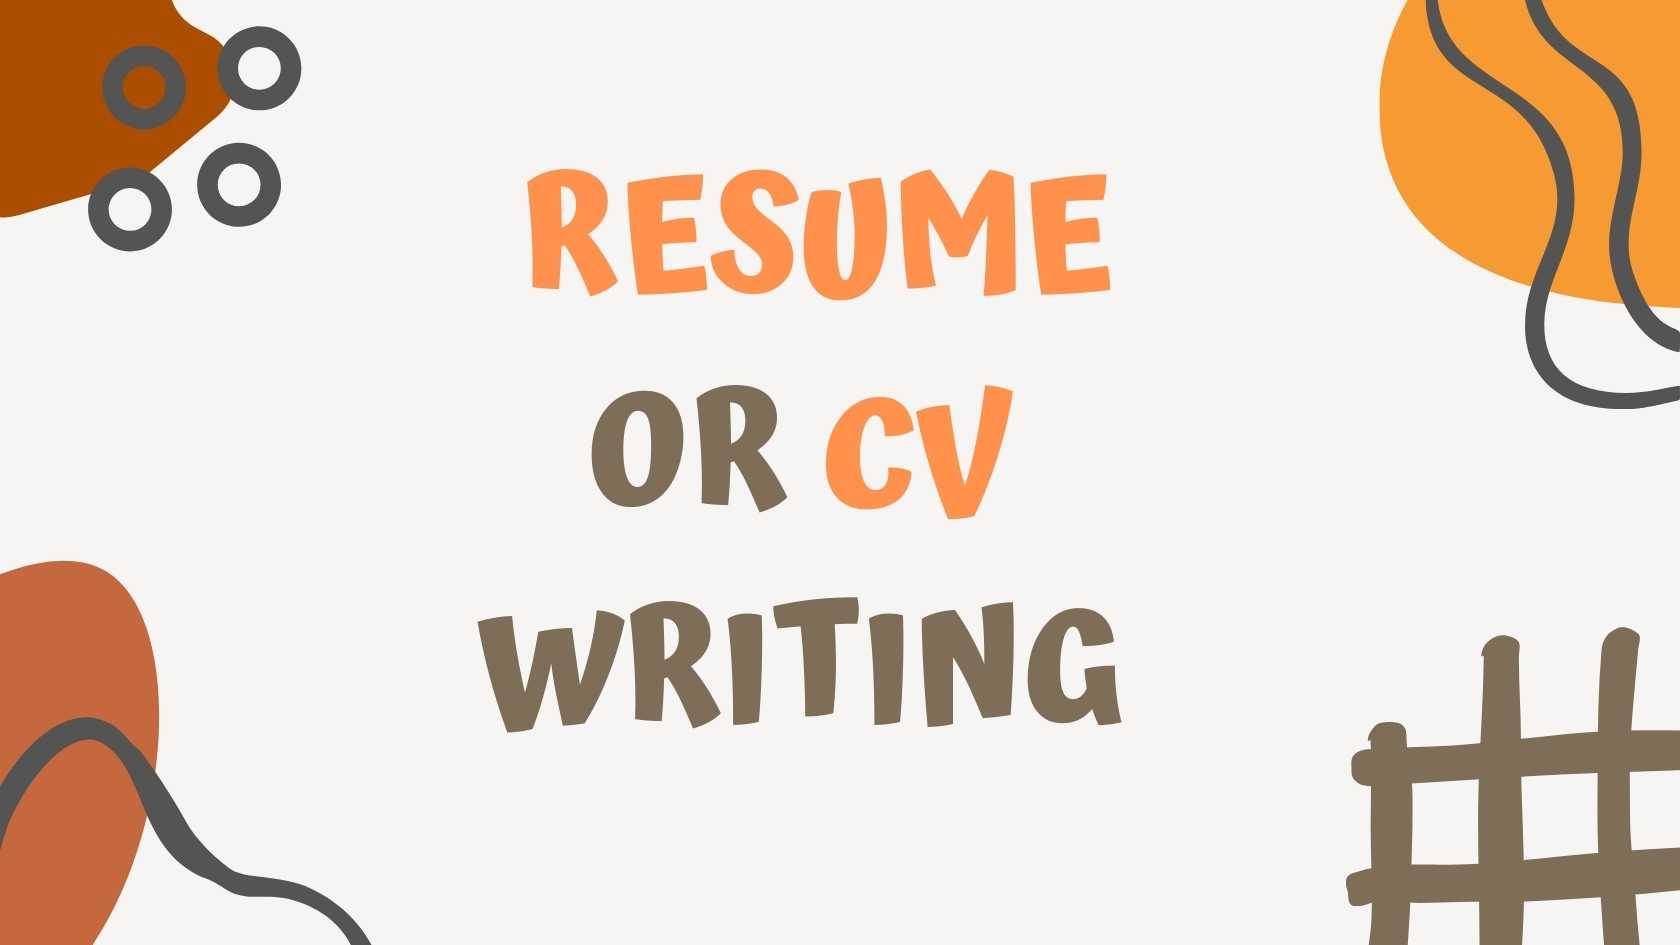 How to write an effective resume or CV?